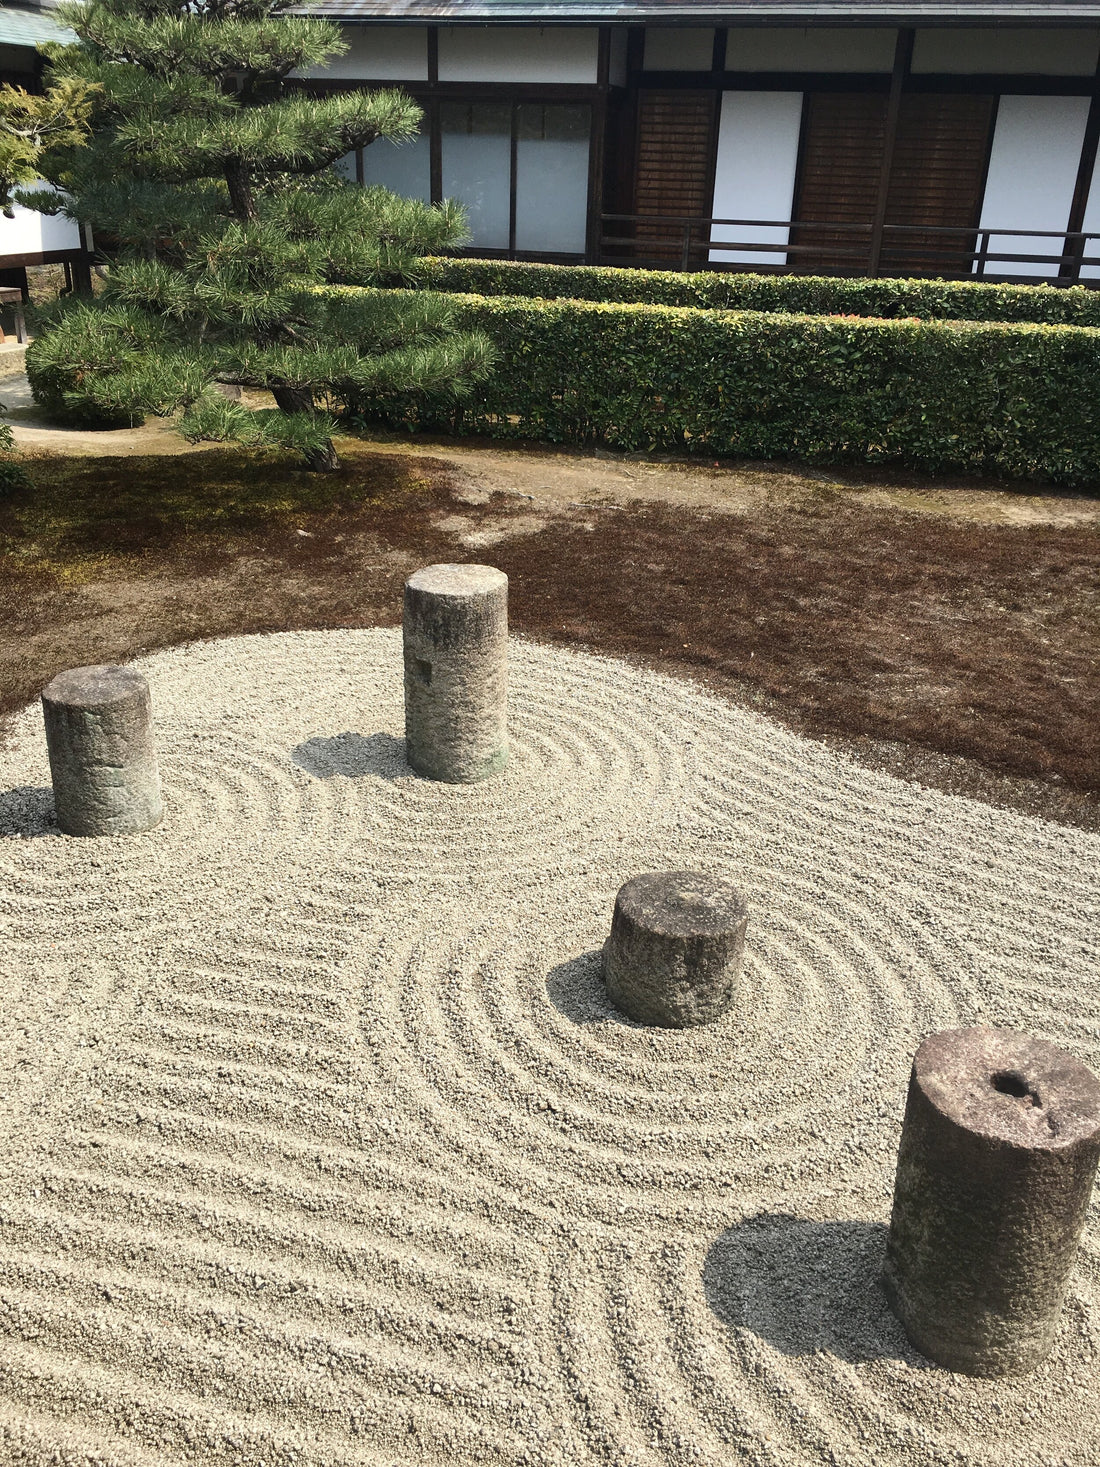 The trip to Japan and Japanese gardens